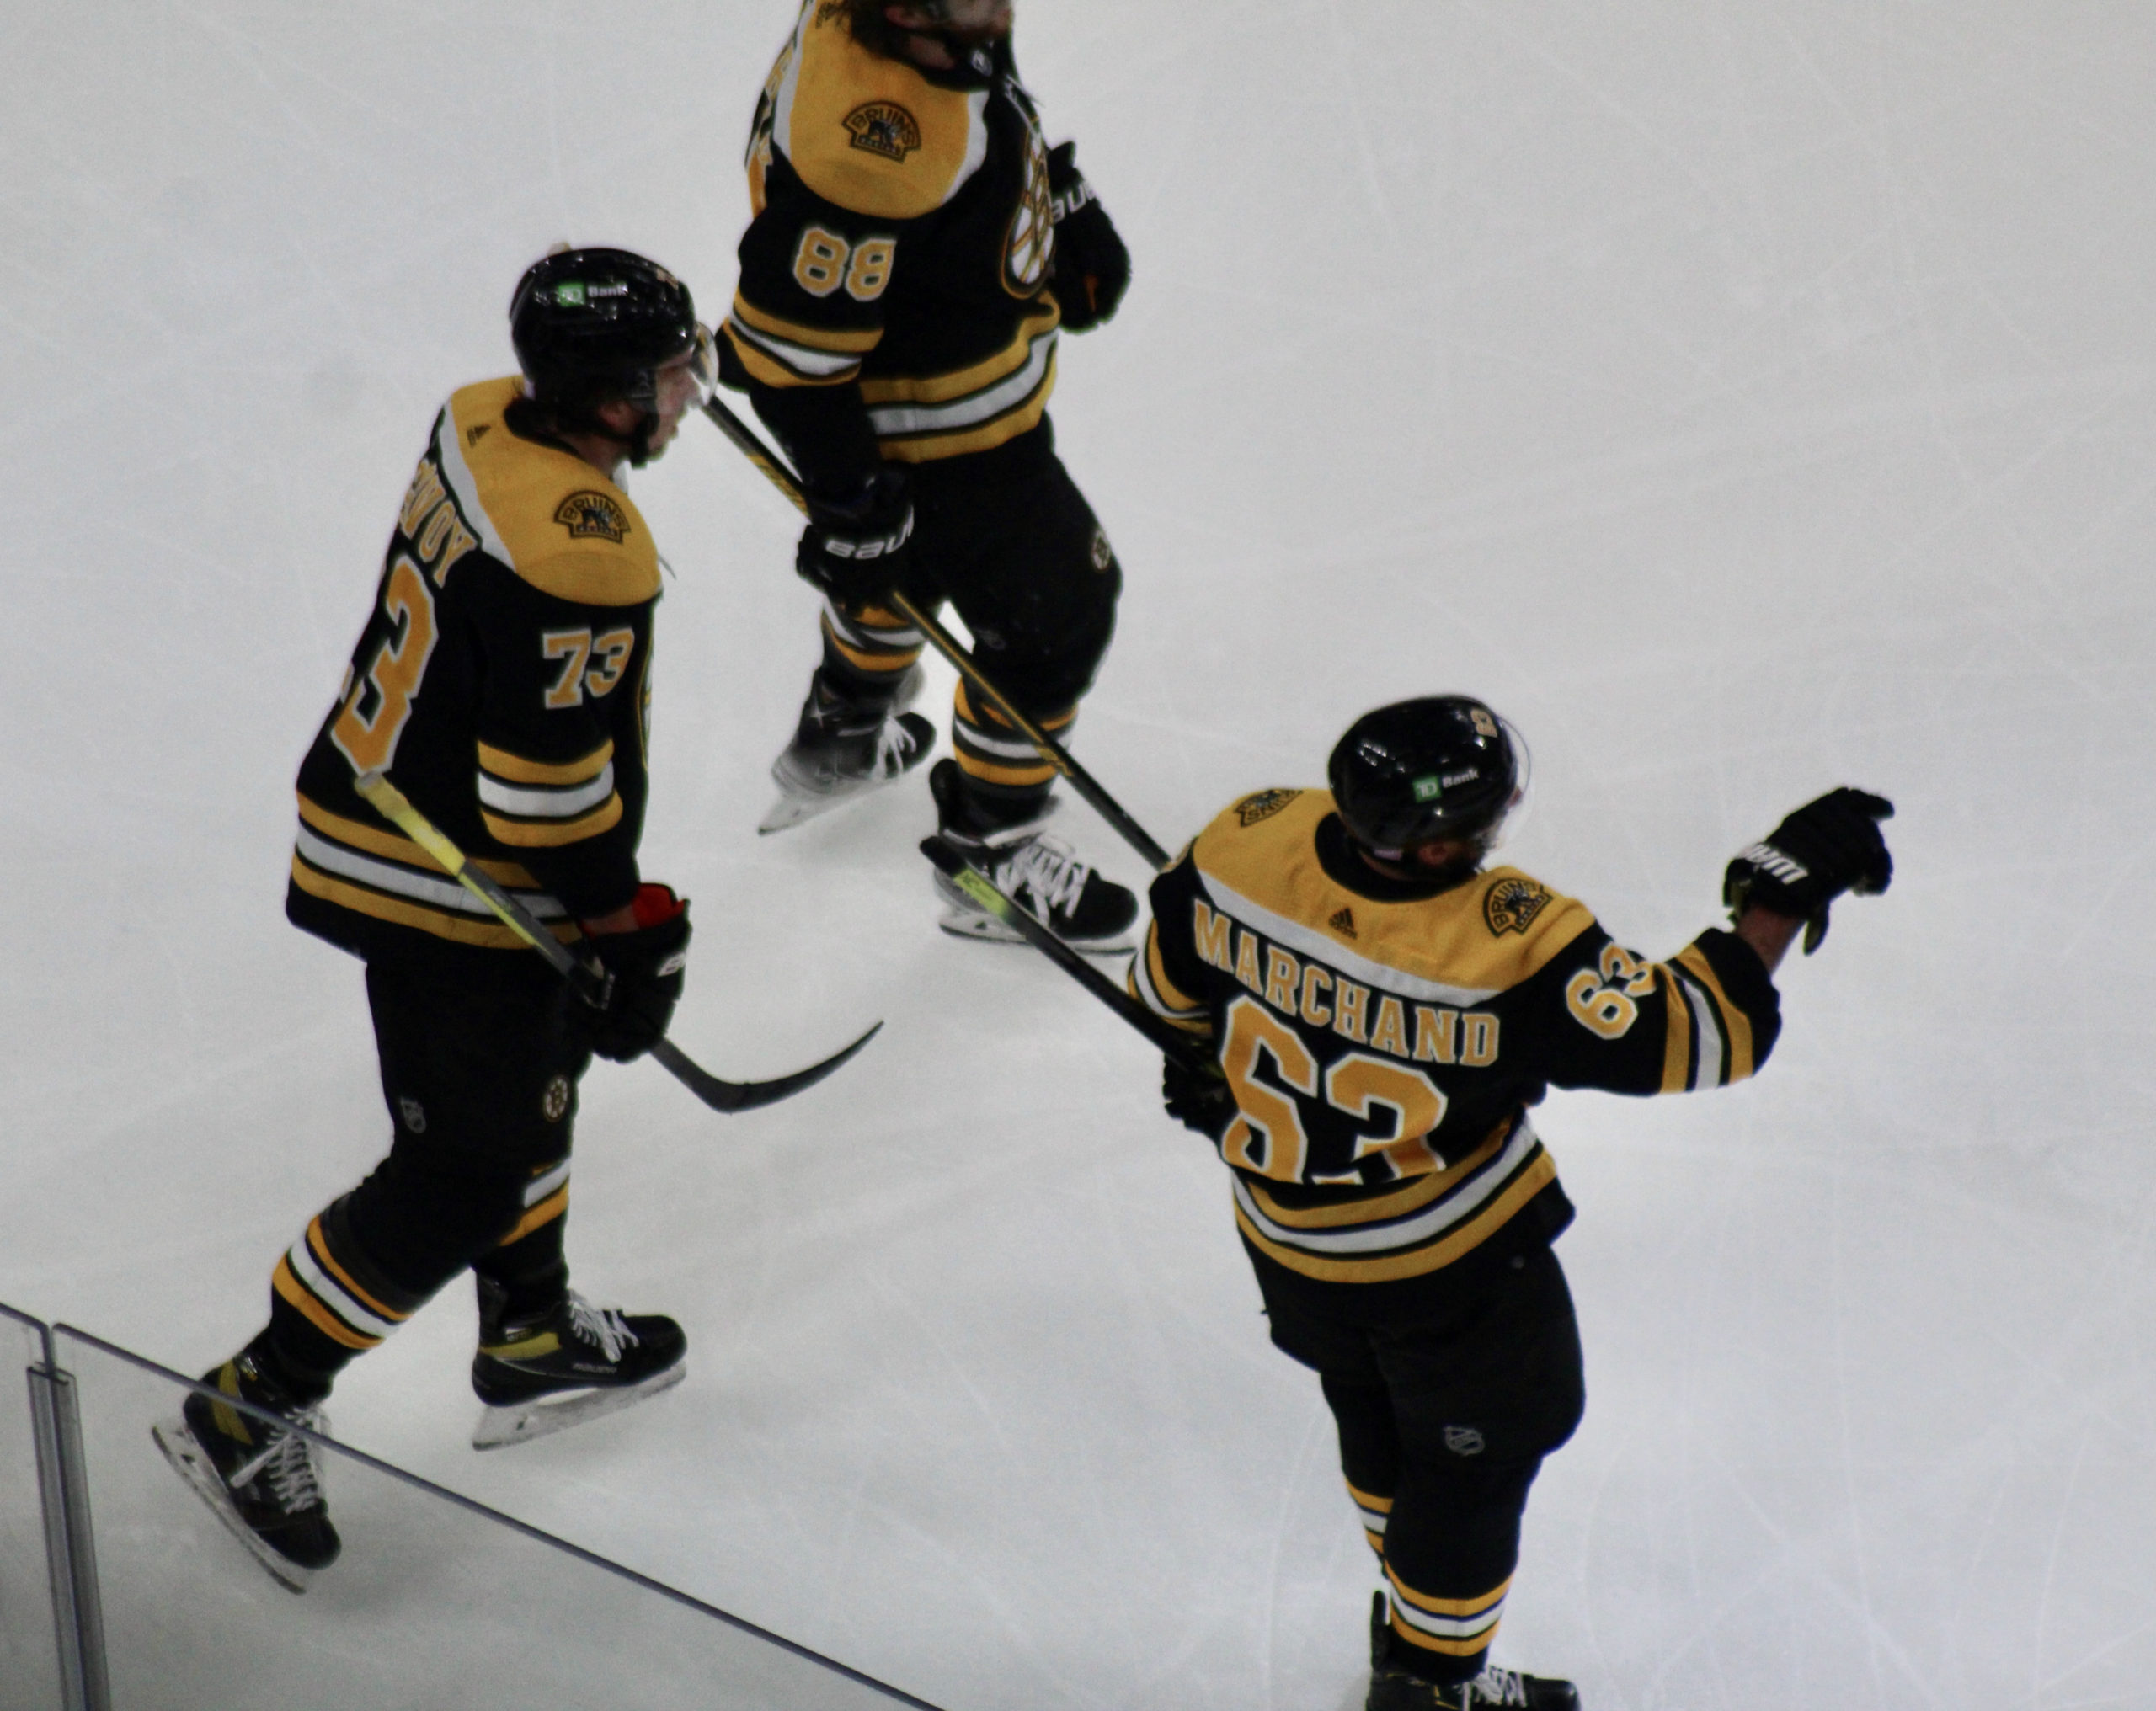 Solid 3rd Lifts Bruins